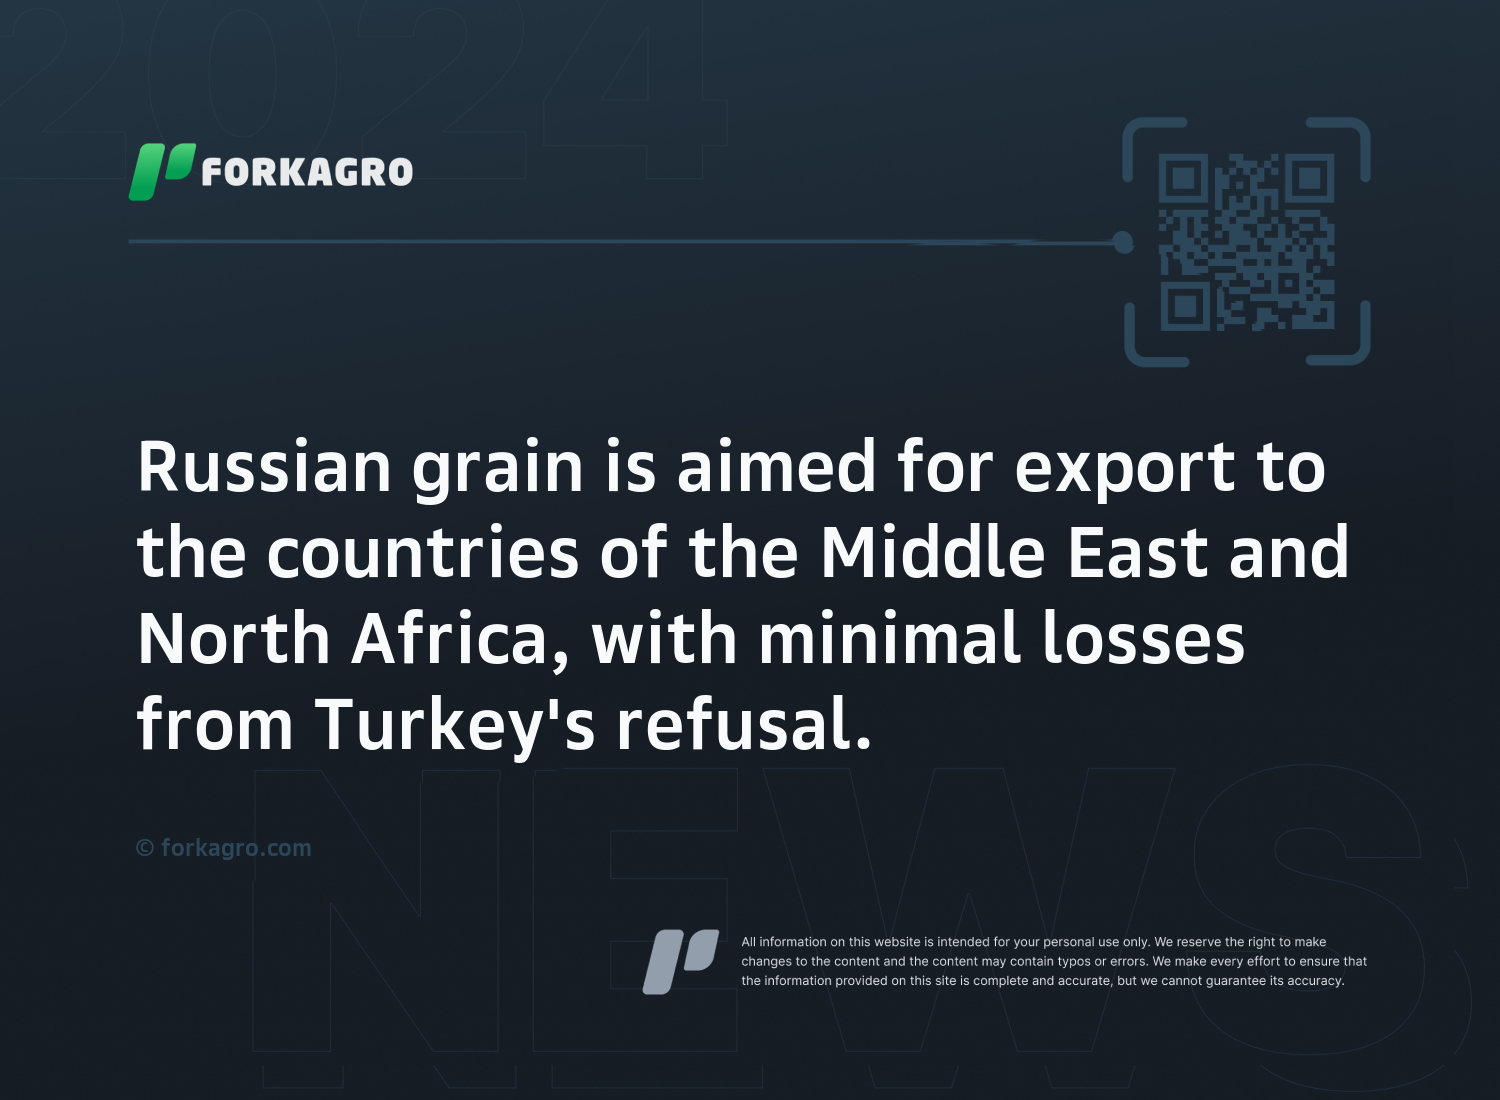 Russian grain is aimed for export to the countries of the Middle East and North Africa, with minimal losses from Turkey's refusal.